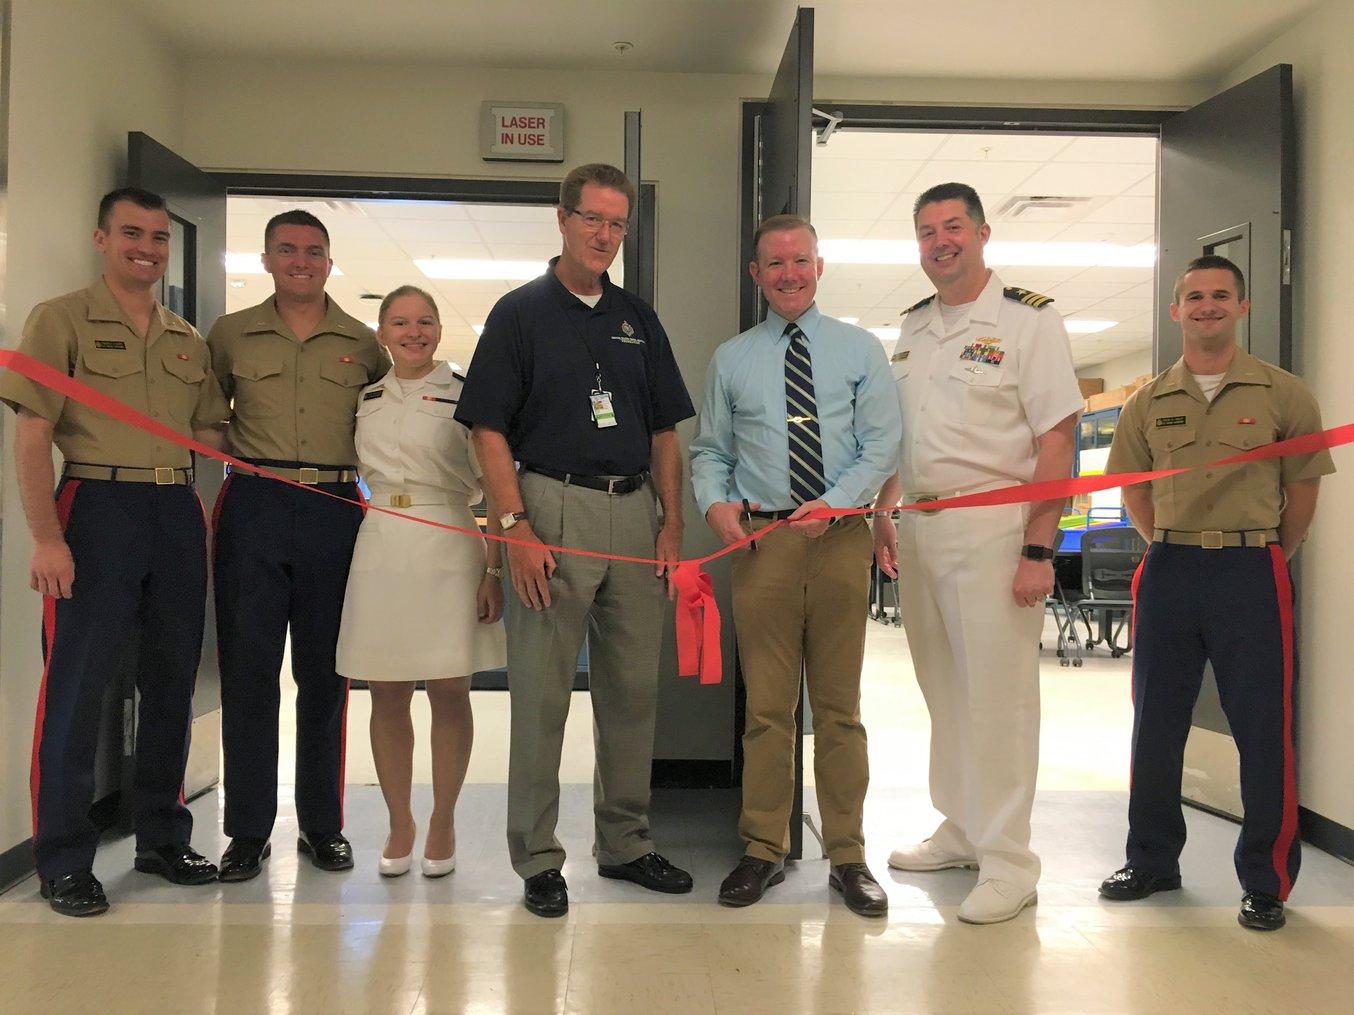 Captain Brad Baker and colleagues on the opening day of MakerSpaceUSNA.